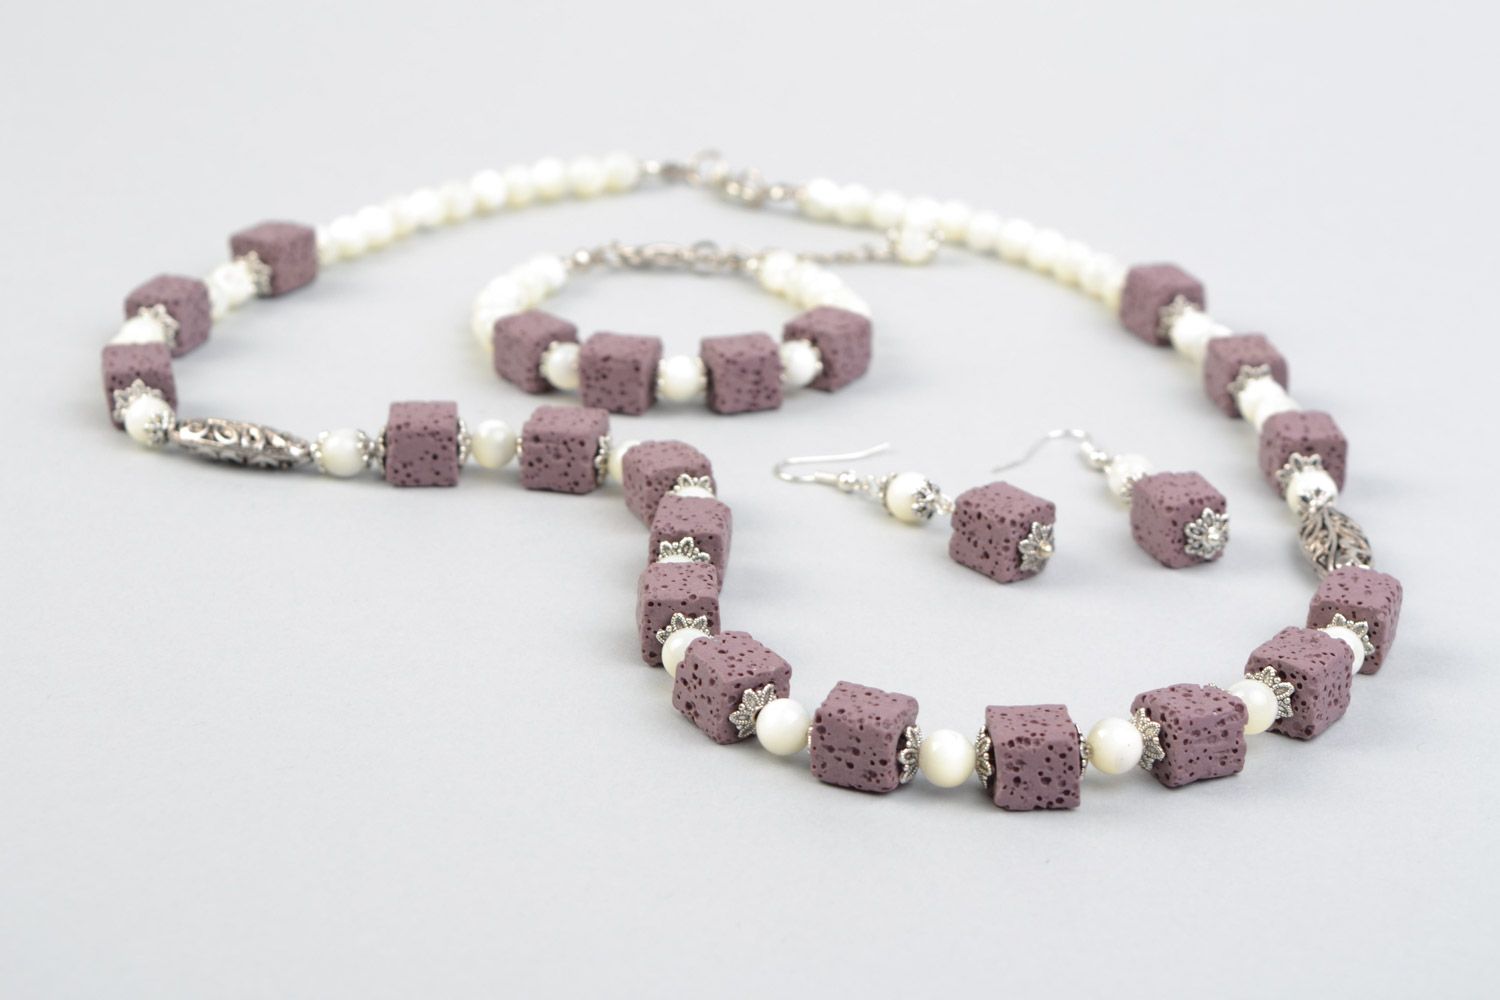 Handmade natural stone and nacre jewelry set earrings bracelet and necklace photo 5